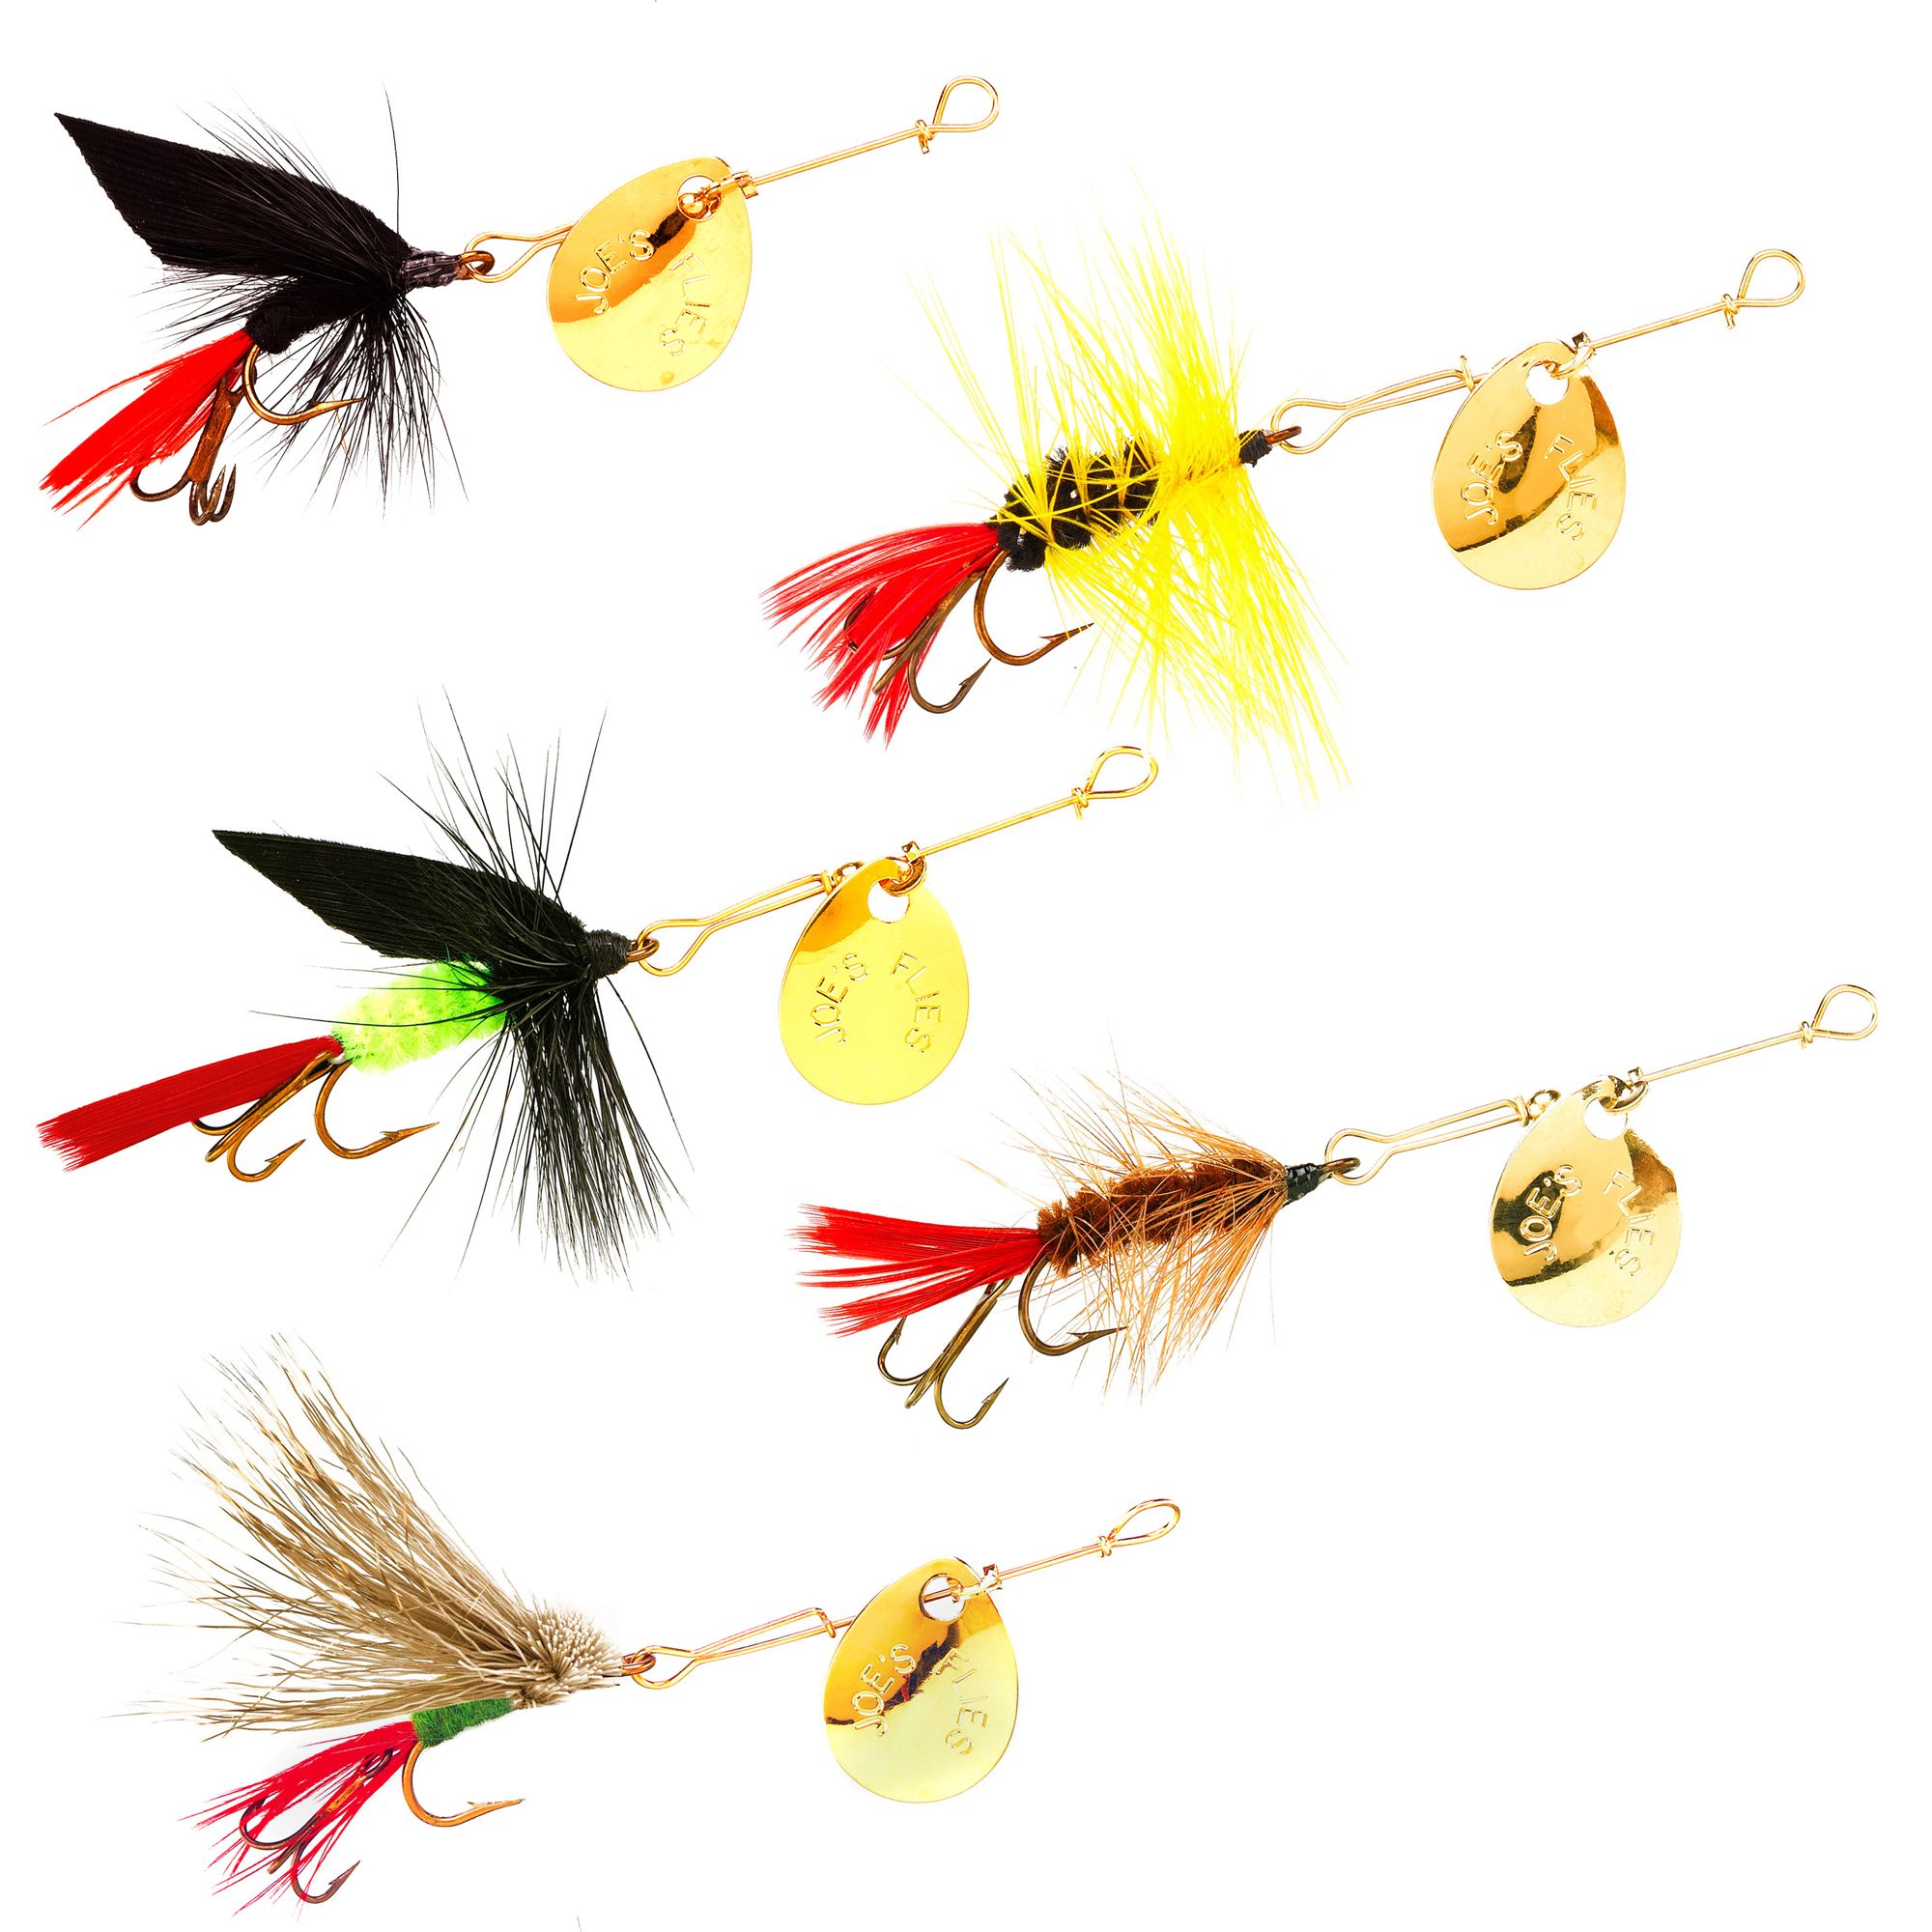 Dick's Sporting Goods Joe's Flies Hot 4 Trout Willow Leaf Spinner